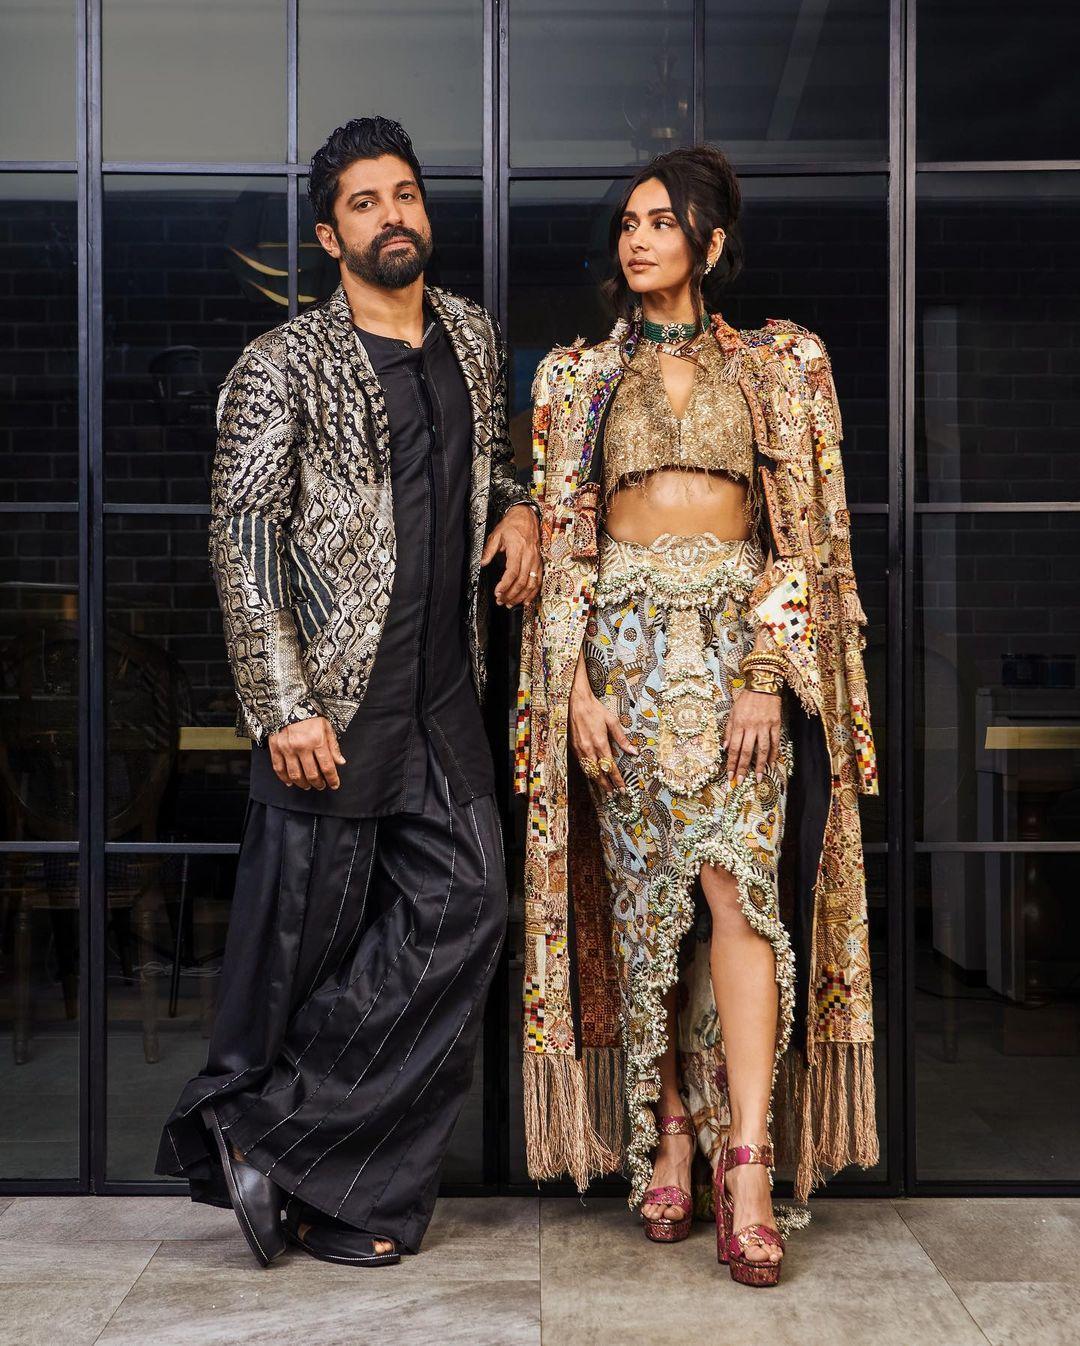 If you have a family function to attend and you want to ace the party, throwing major couple goals, then take inspiration from these masters of art themselves